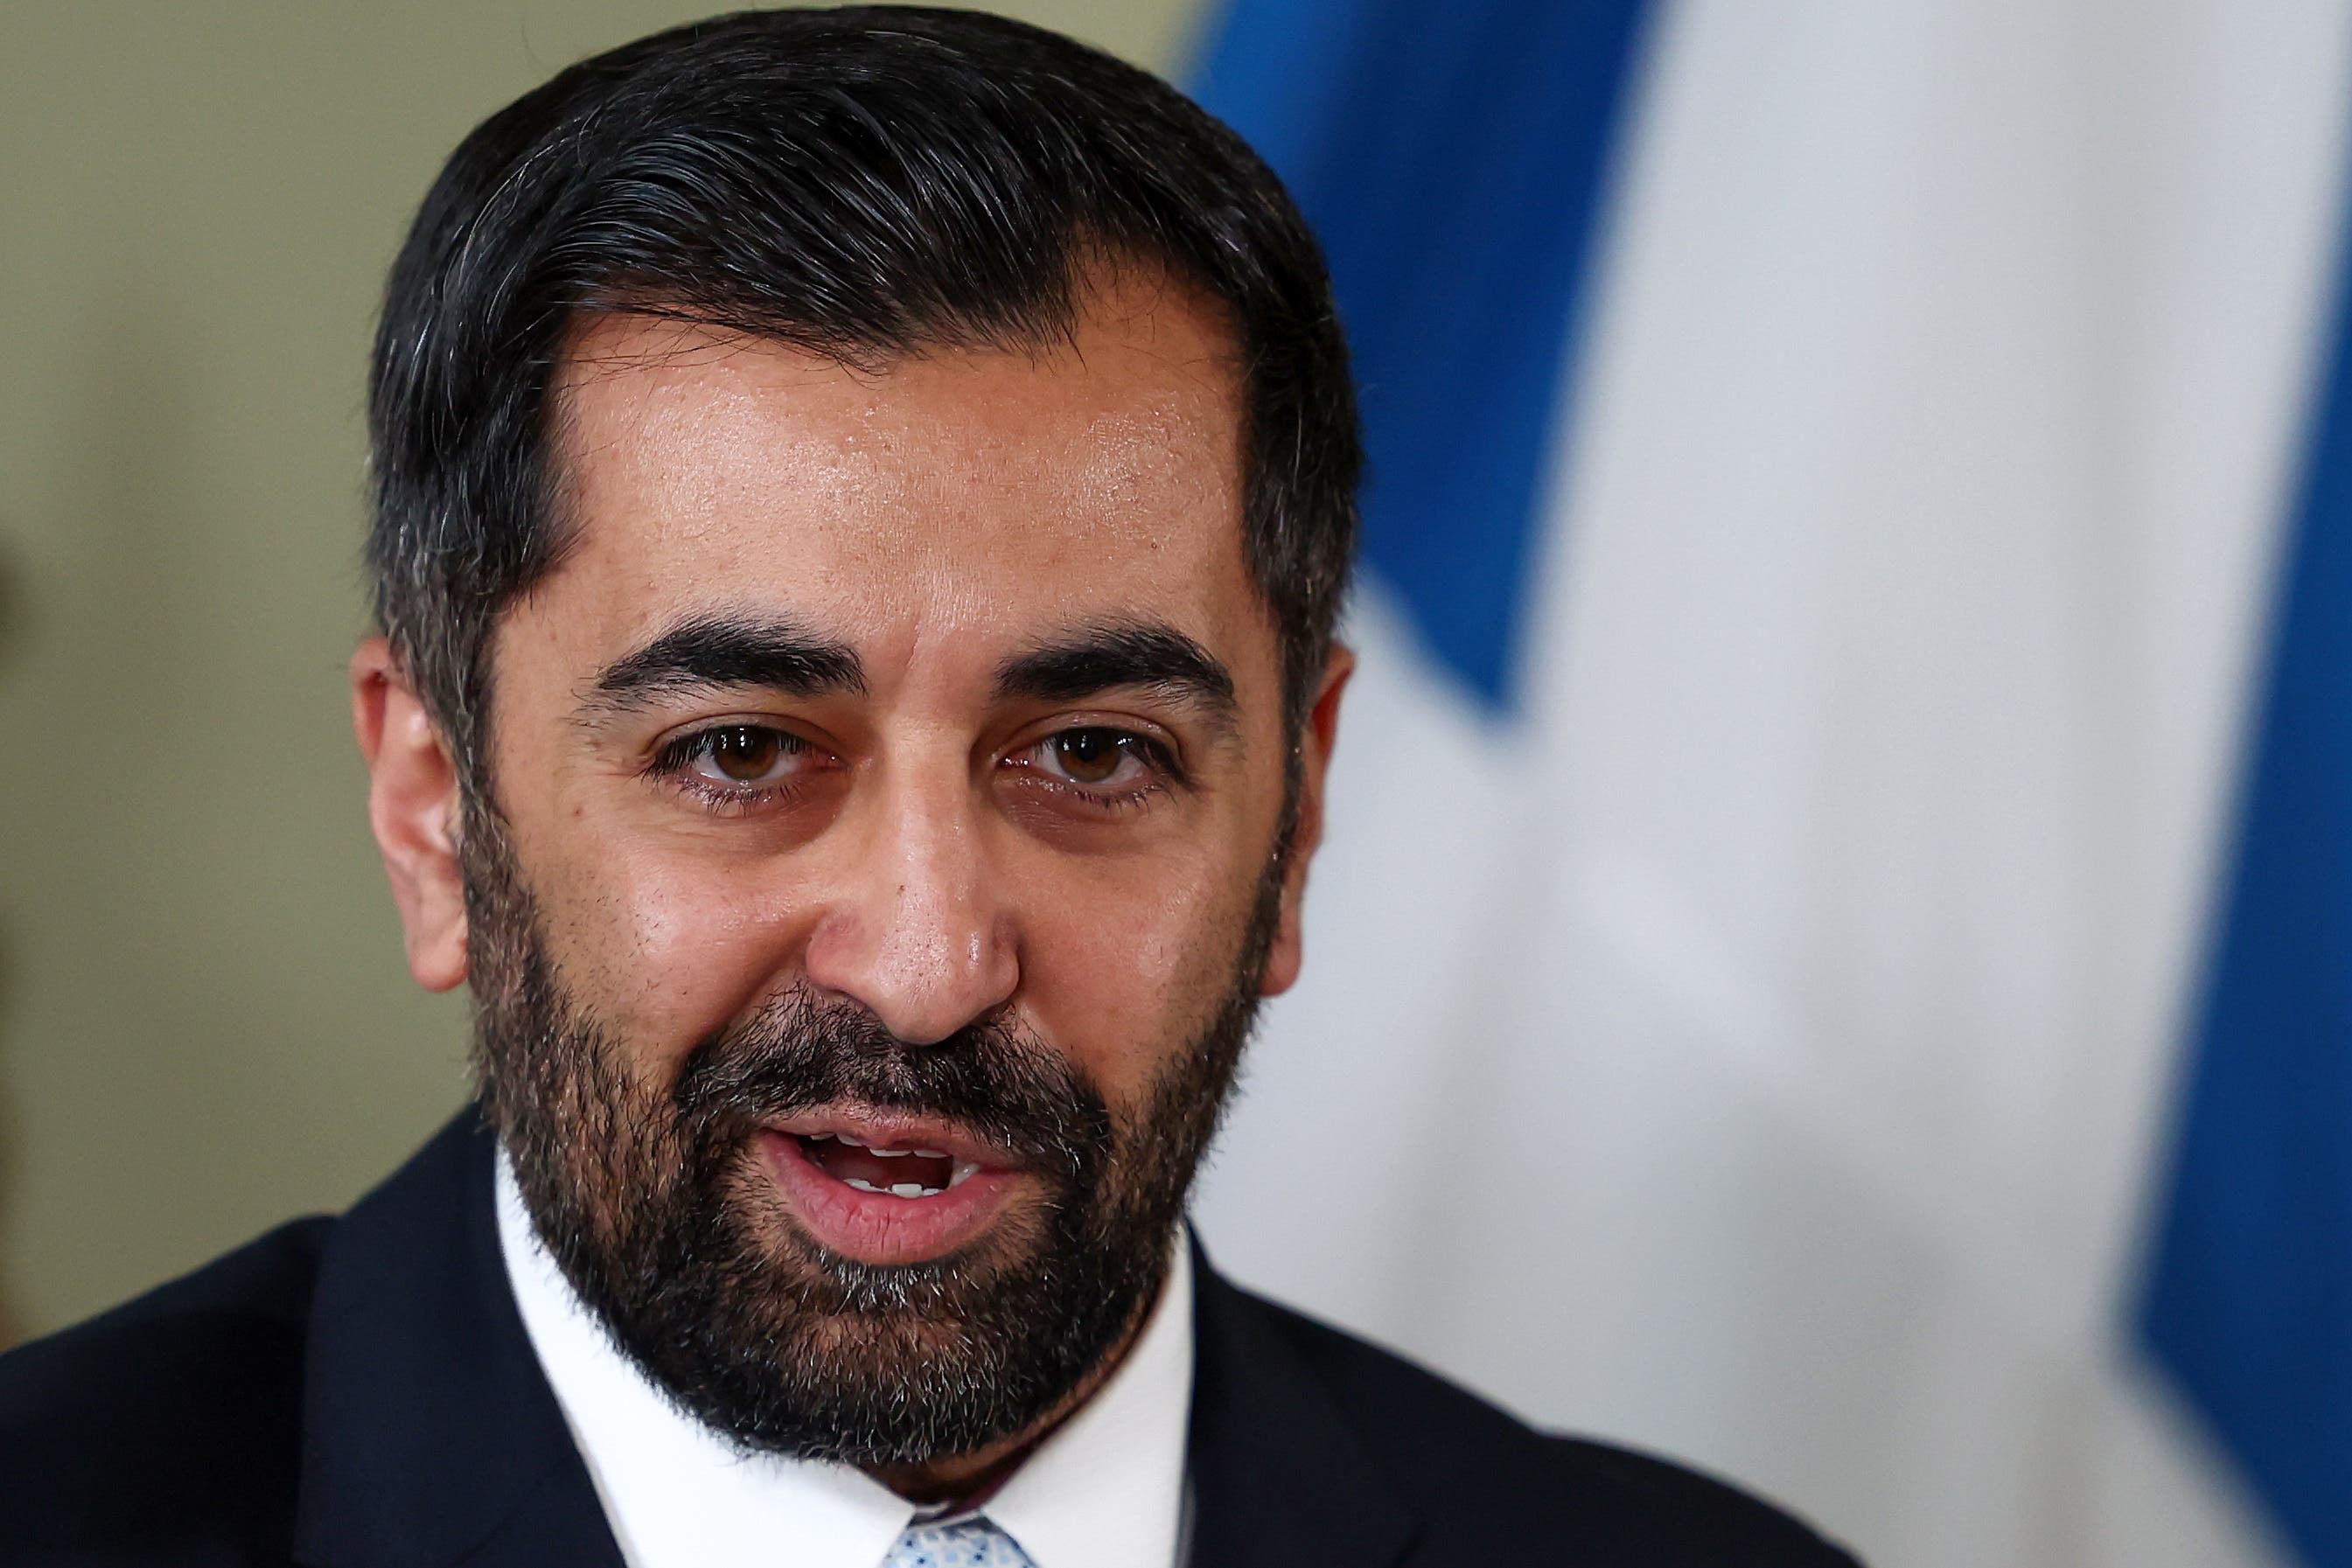 Humza Yousaf dramatically brought the Bute House Agreement to an end